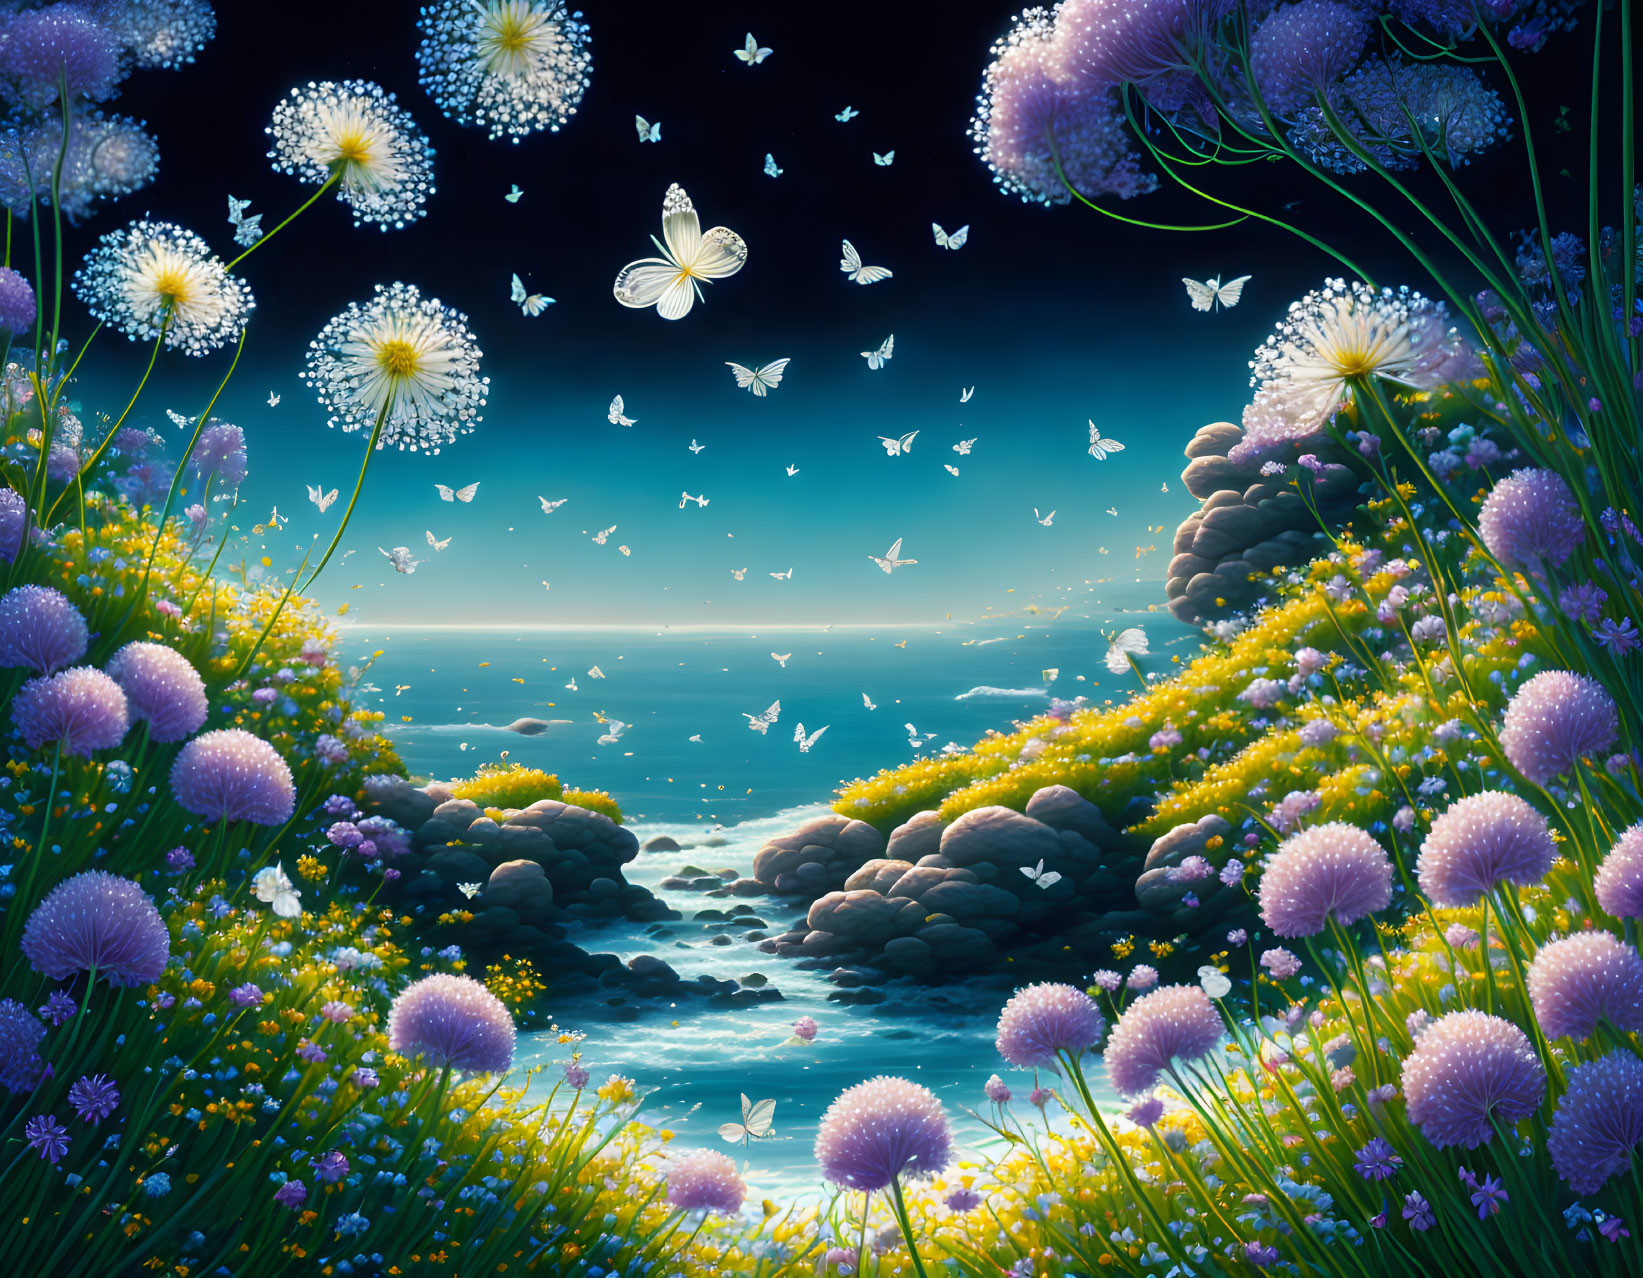 Colorful landscape with flowers, butterflies, ocean, and night sky